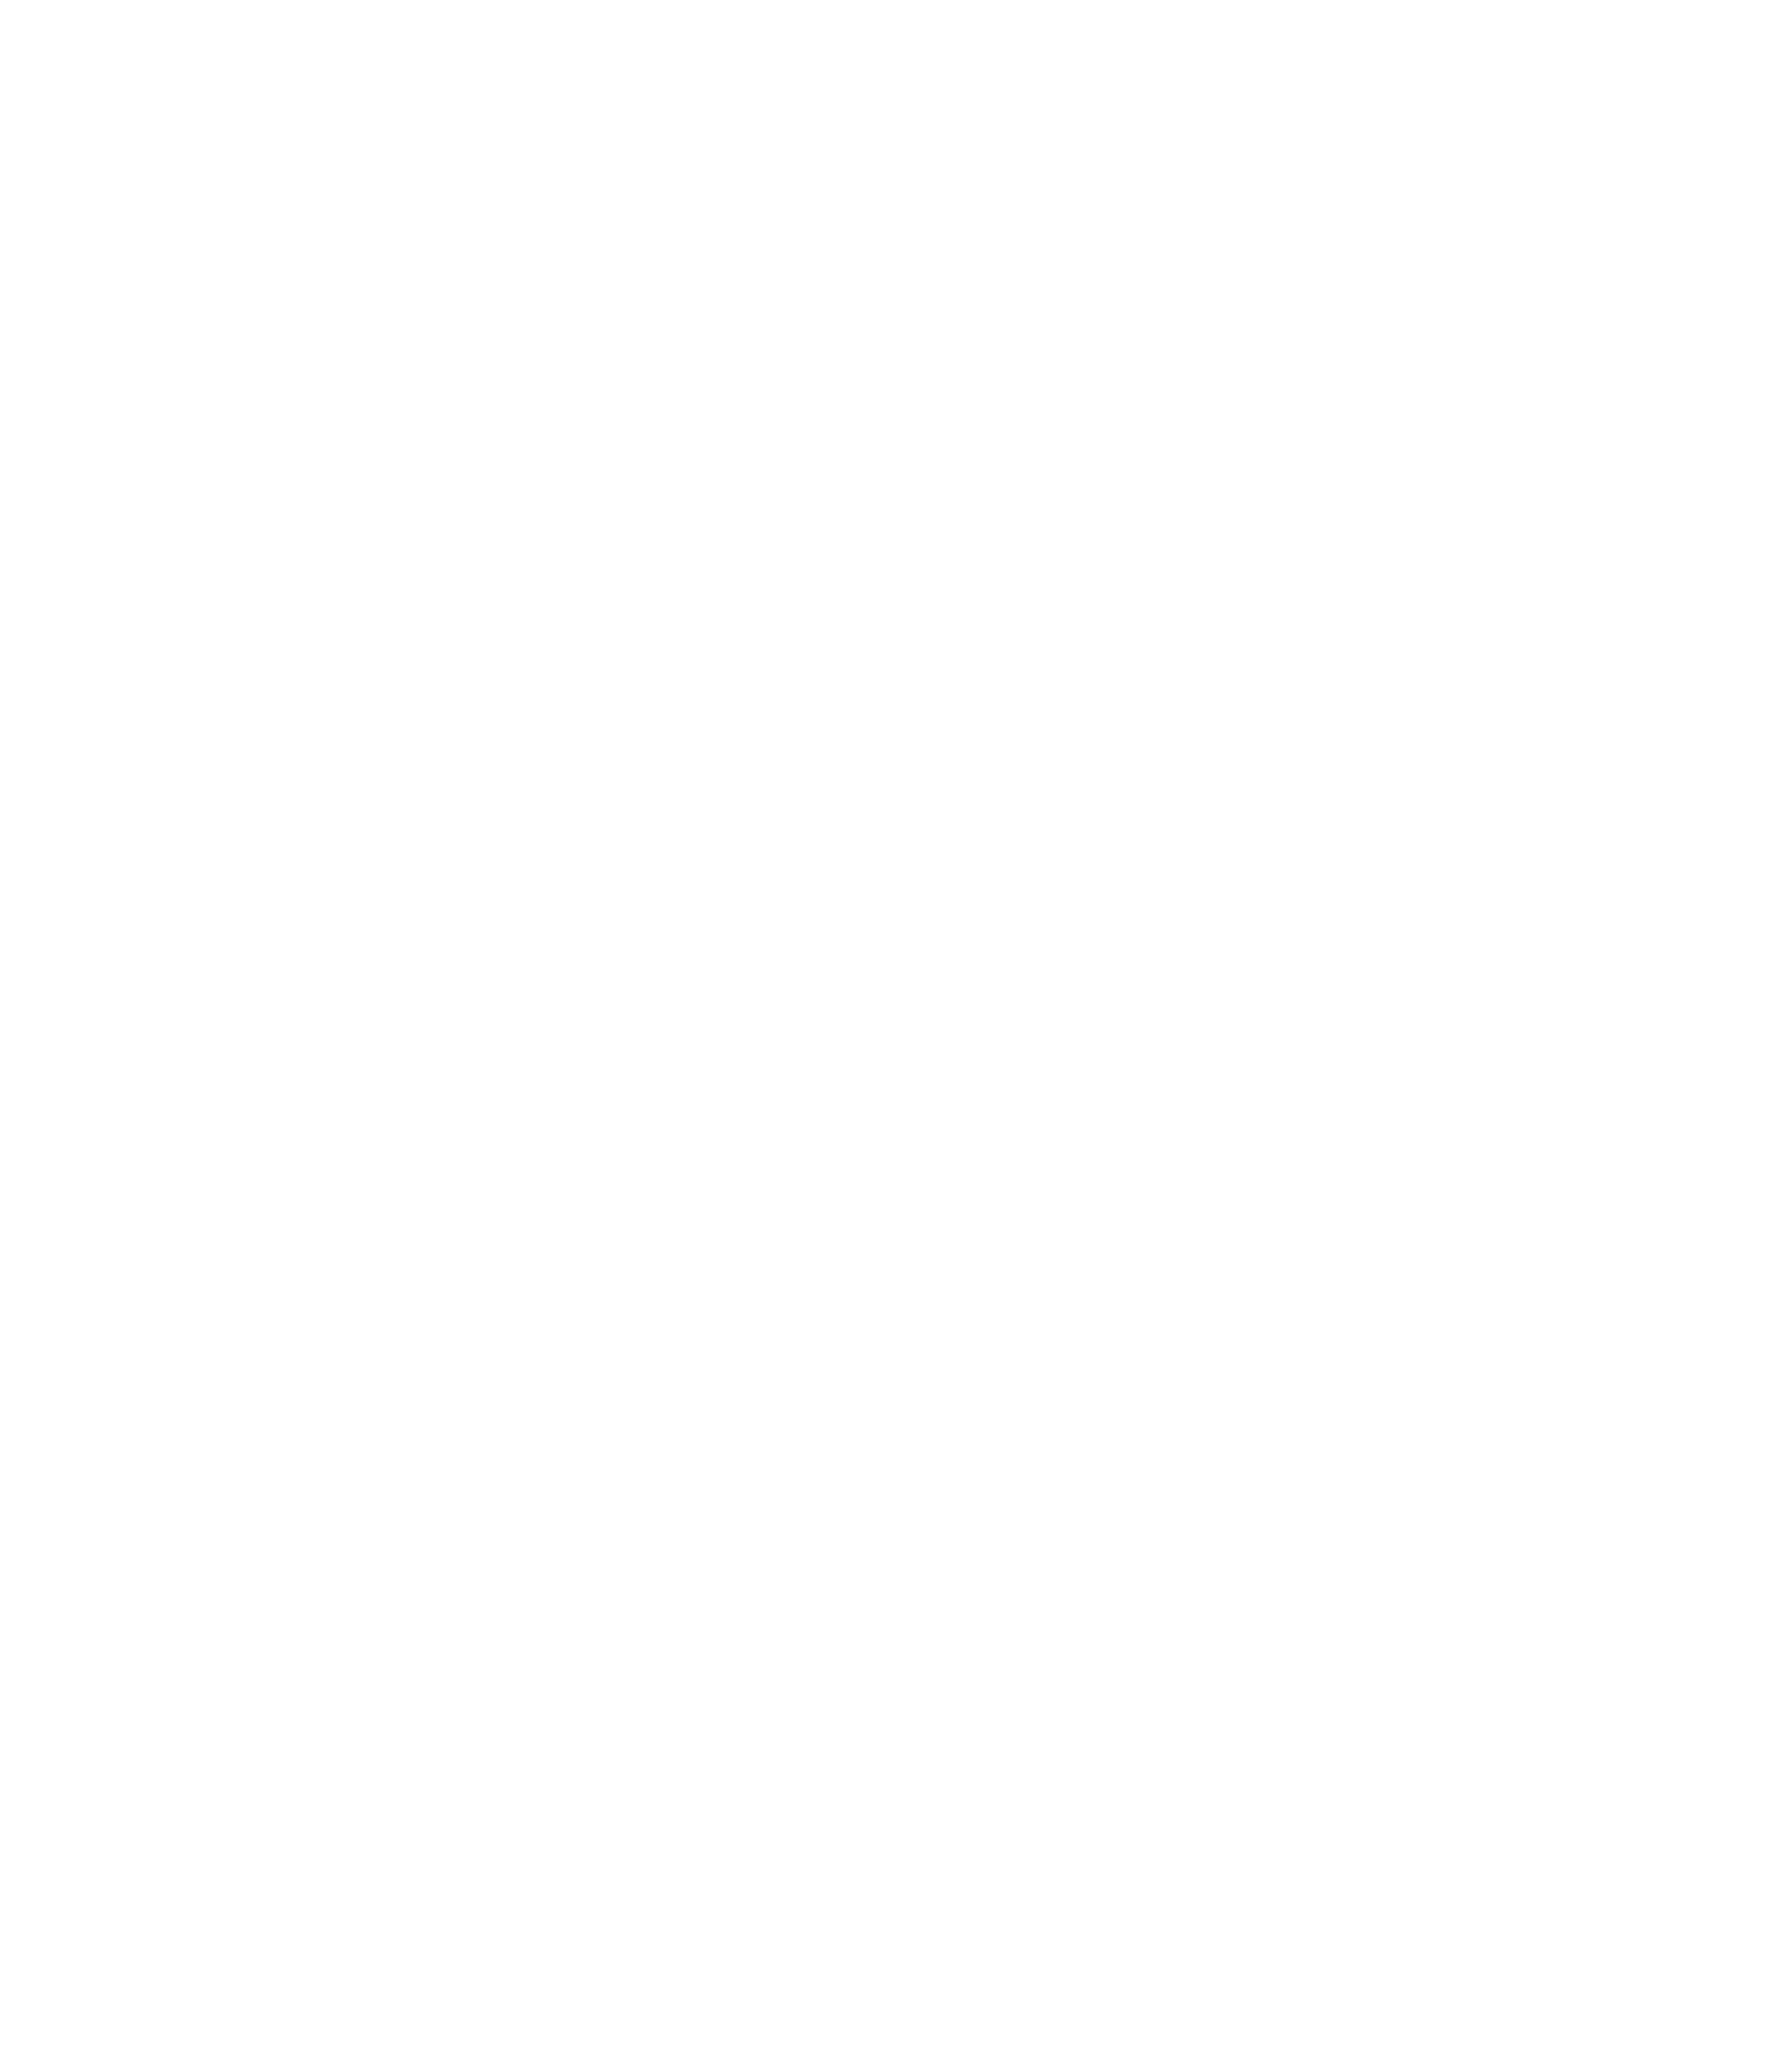 Charge_your_car_day_2022_Oct5_logo_transparent.png